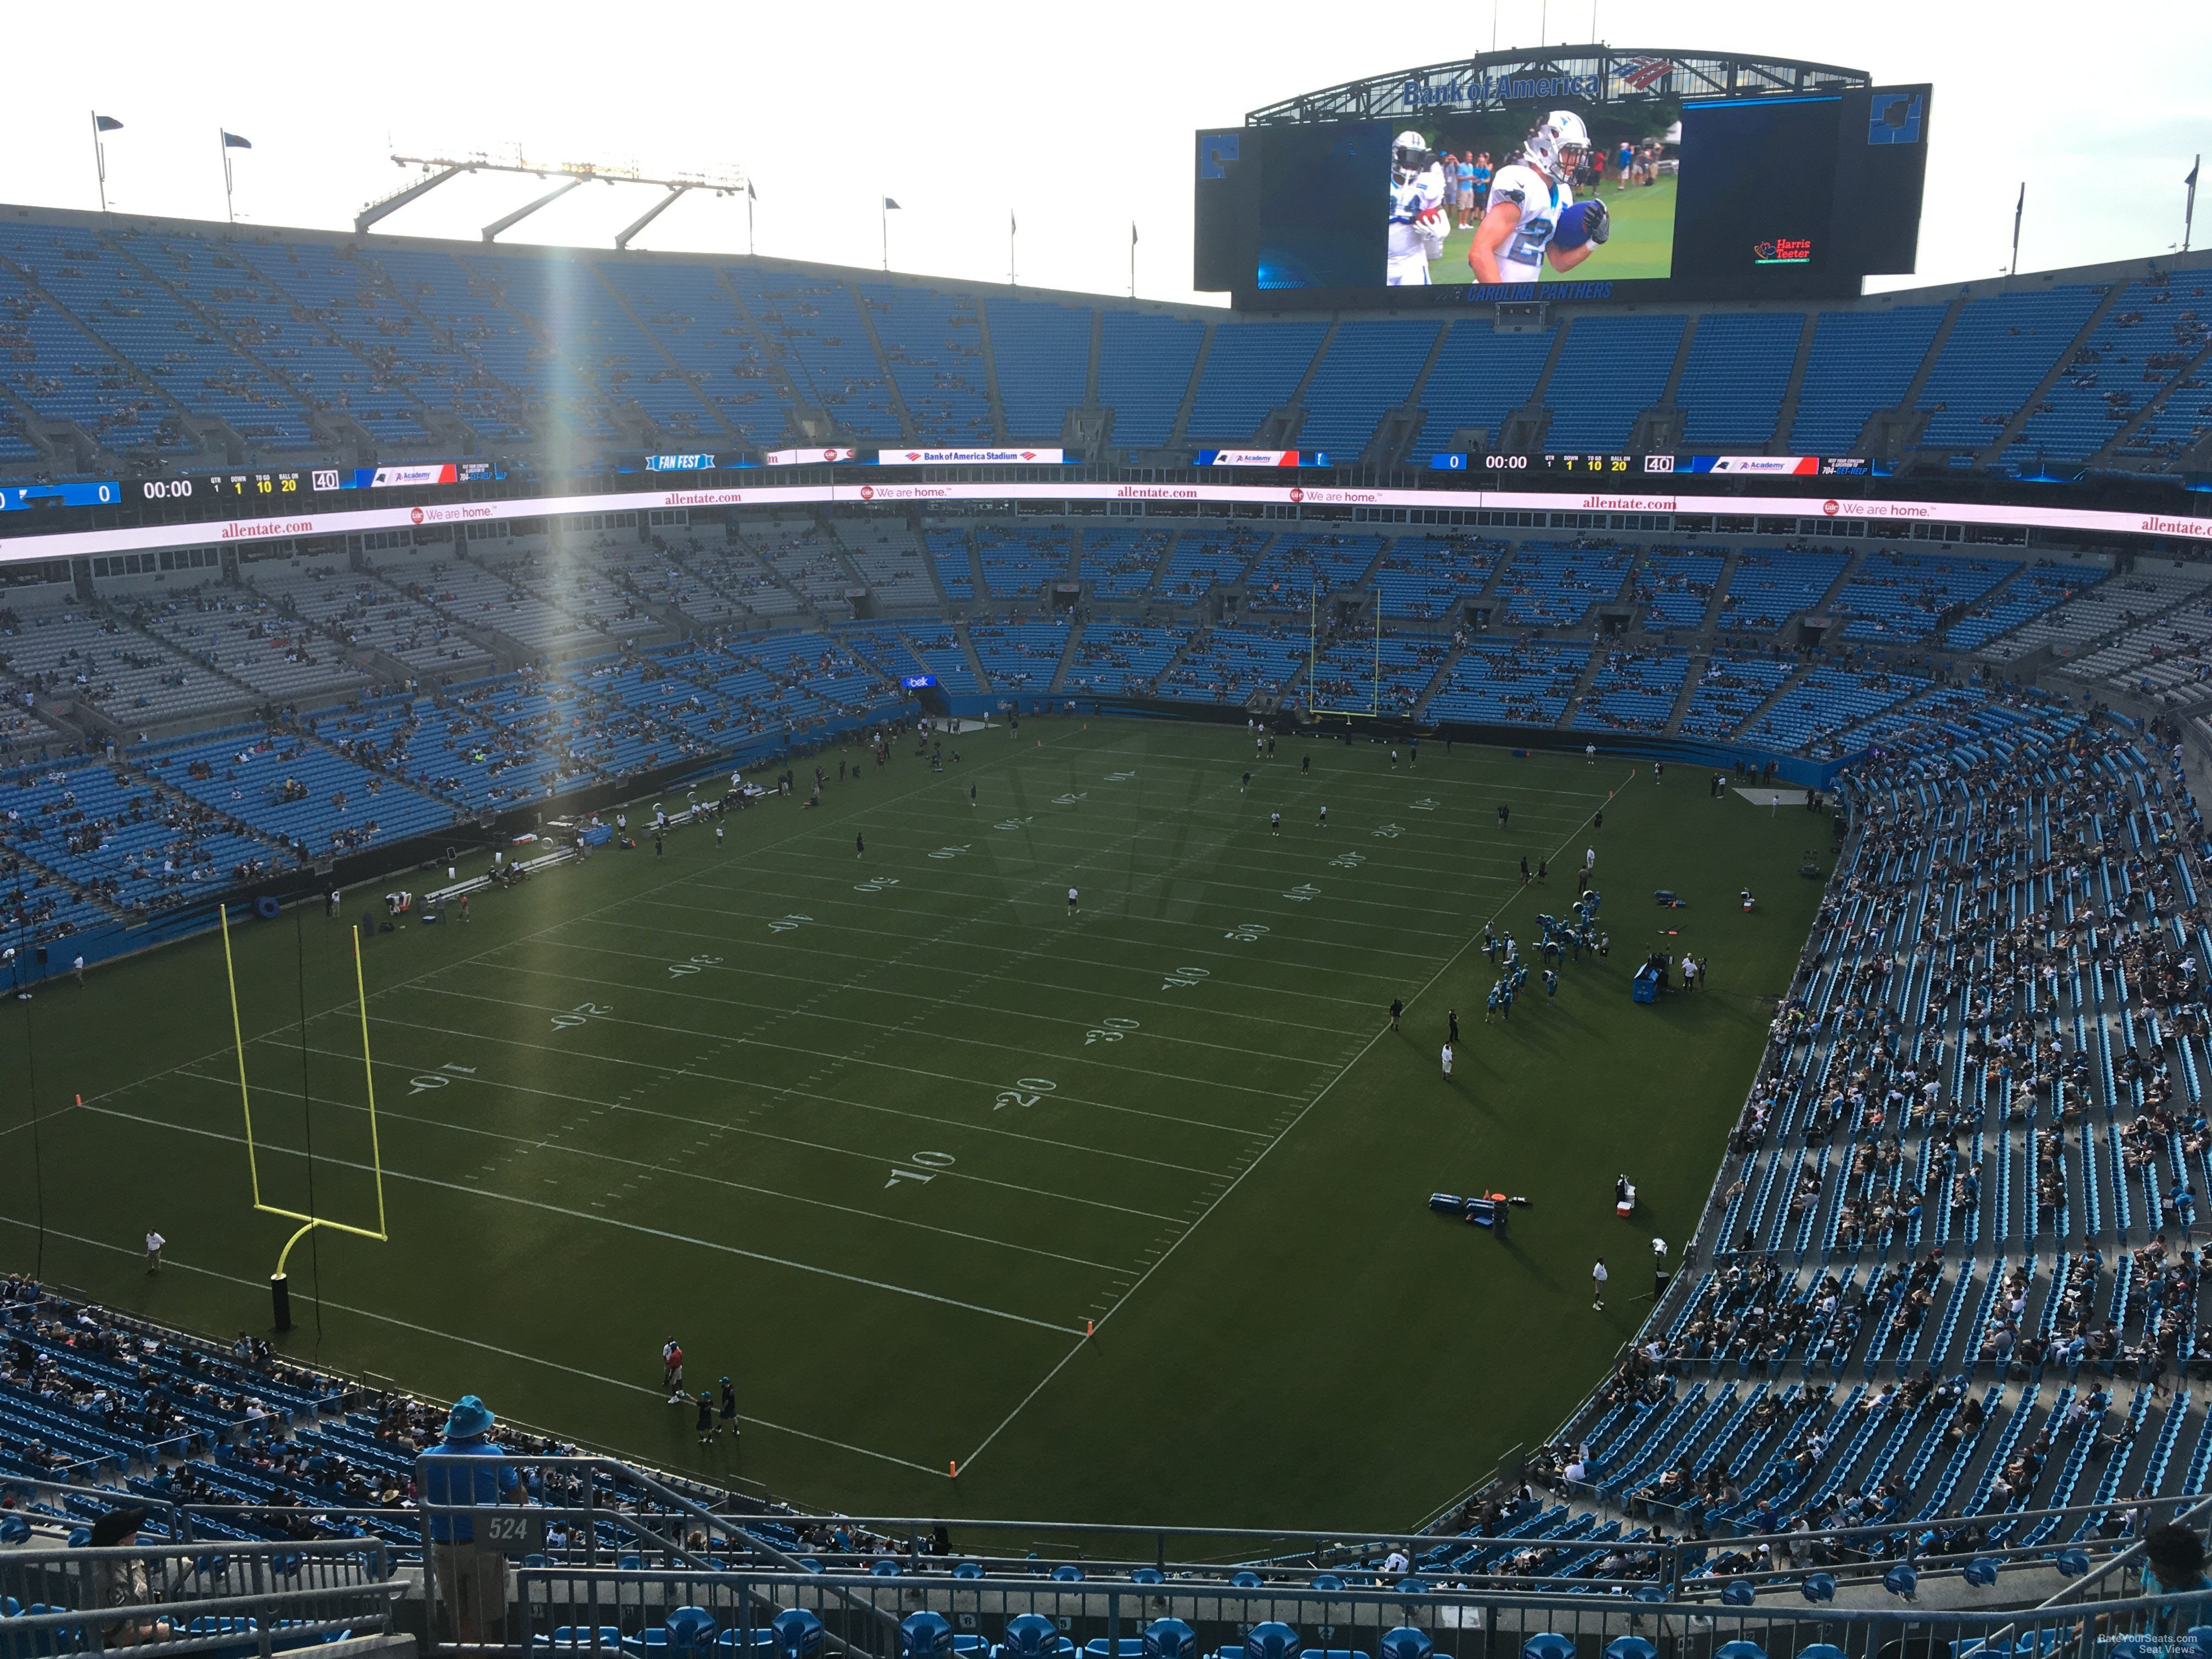 section 524, row 9 seat view  for football - bank of america stadium